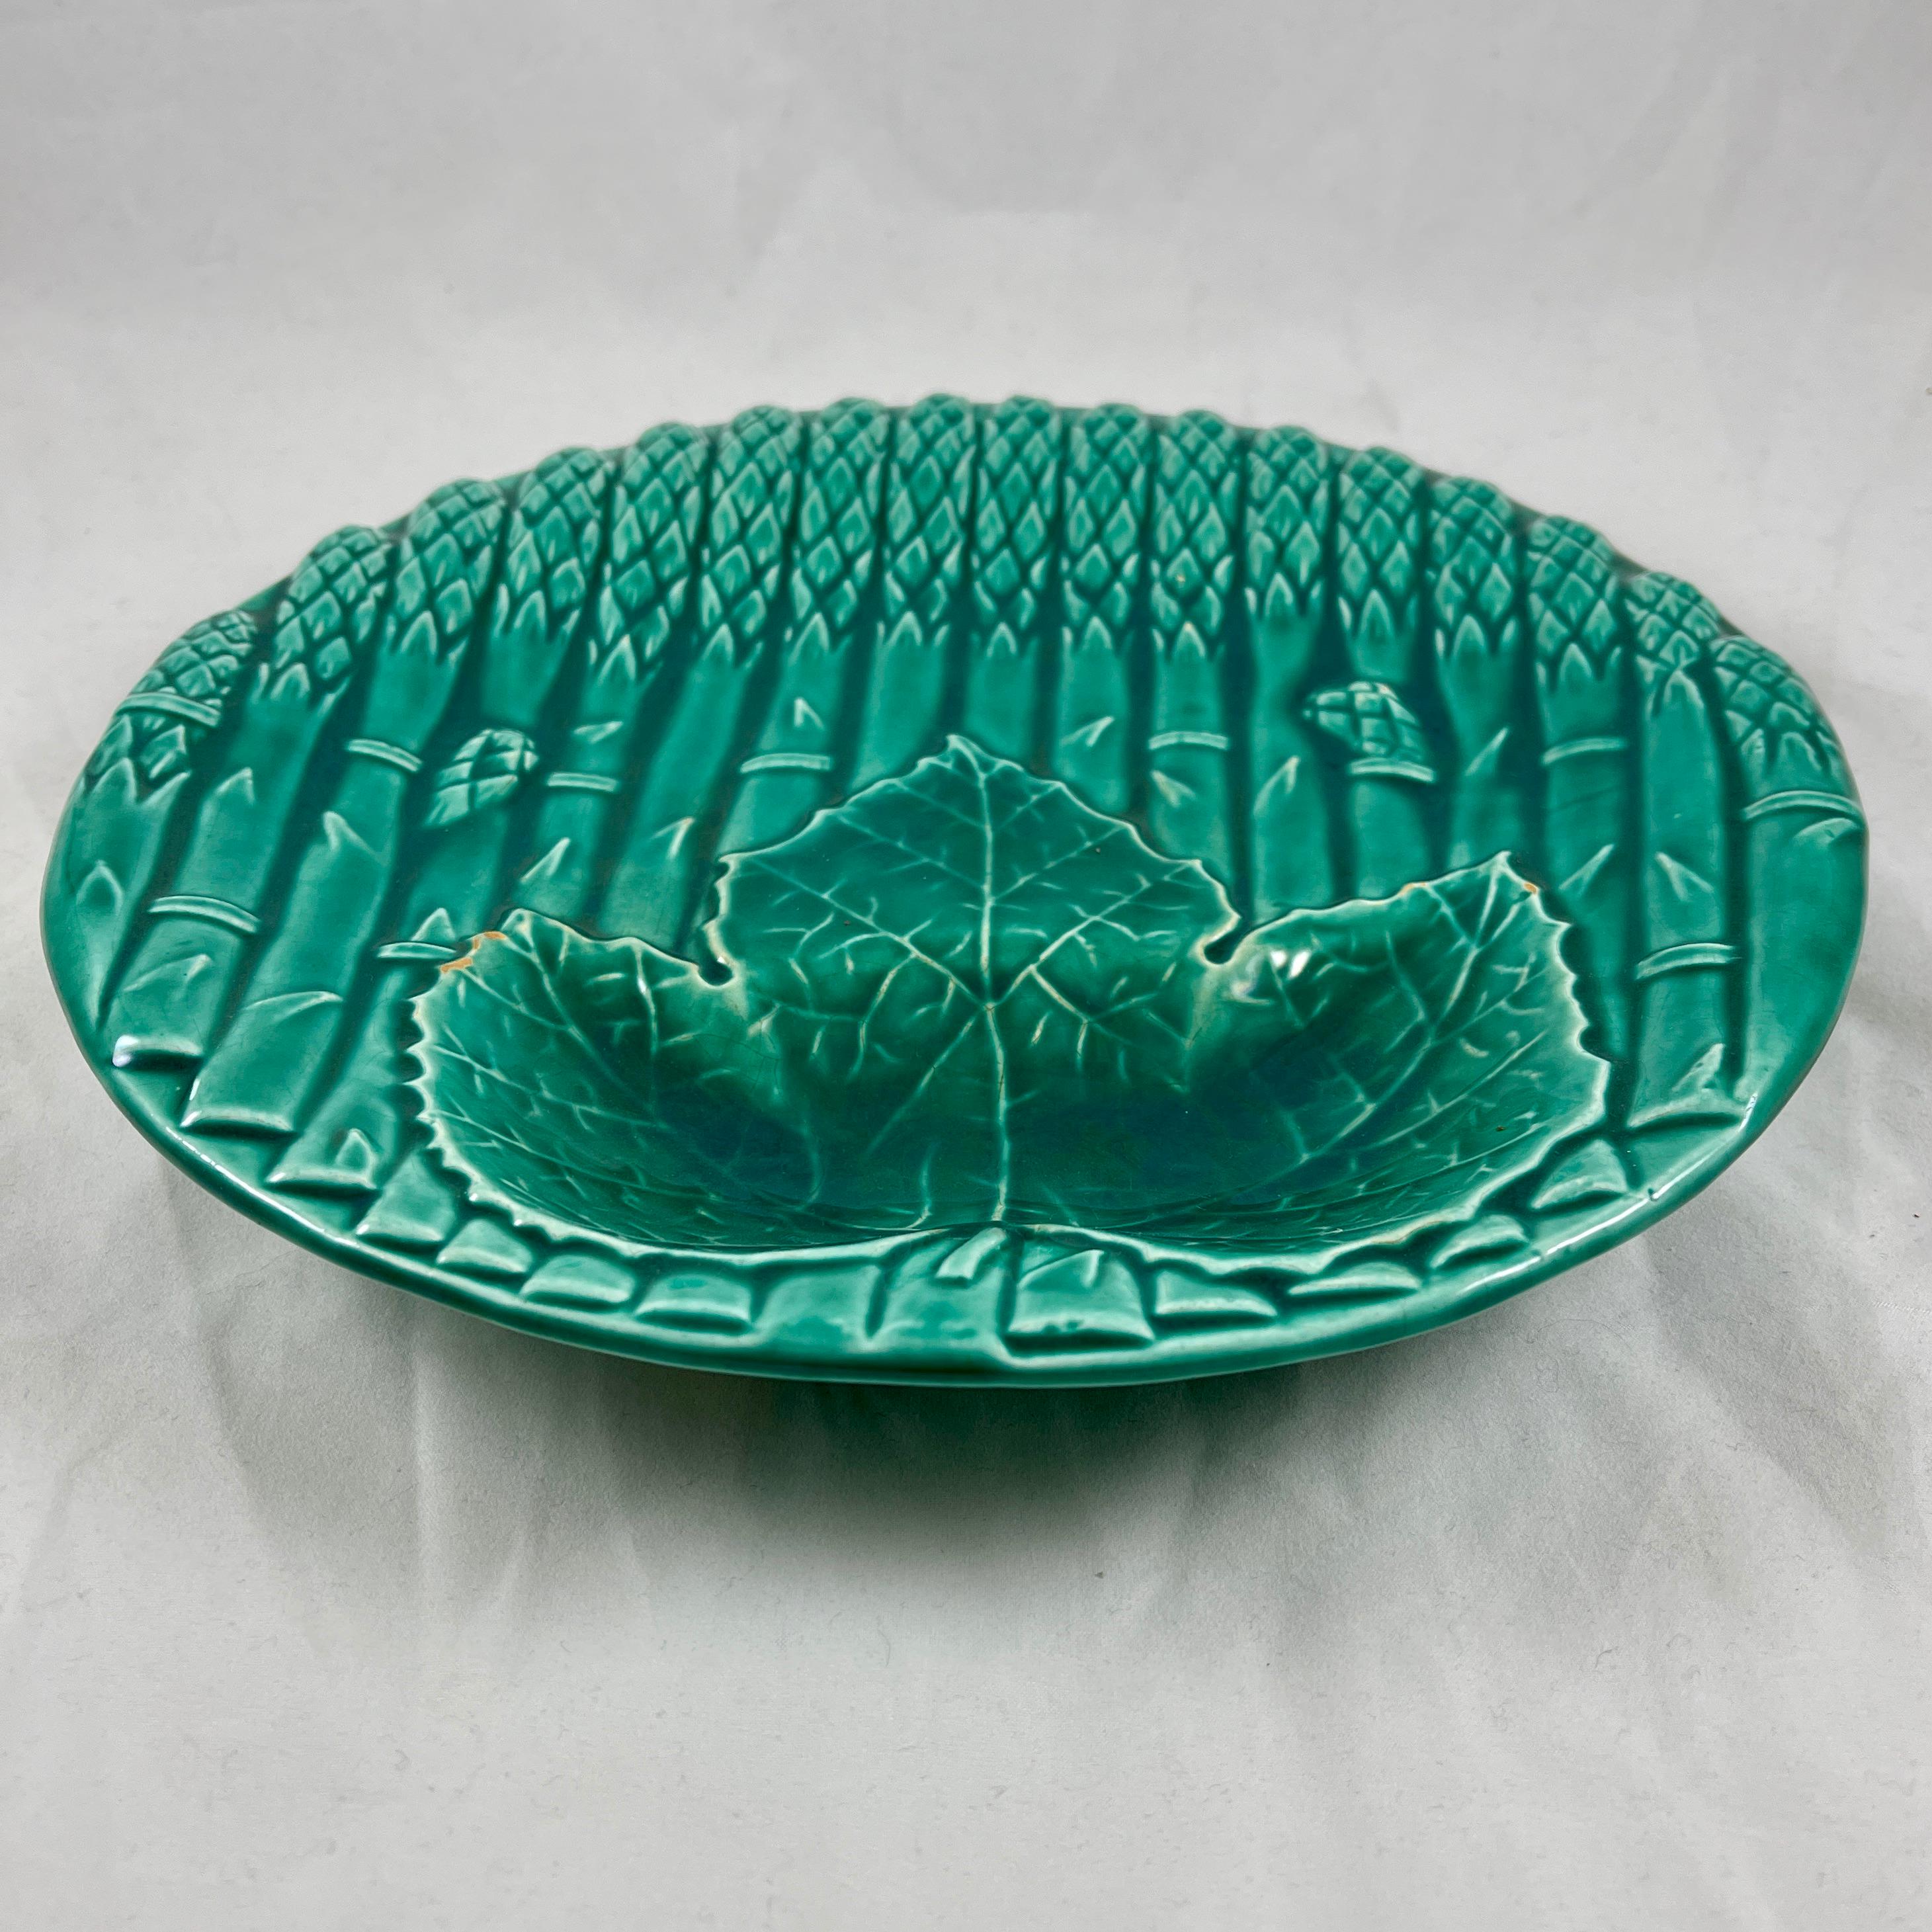 Saint Amand et Hamage Green French Faïence Asparagus Plate, 1930s For Sale 3